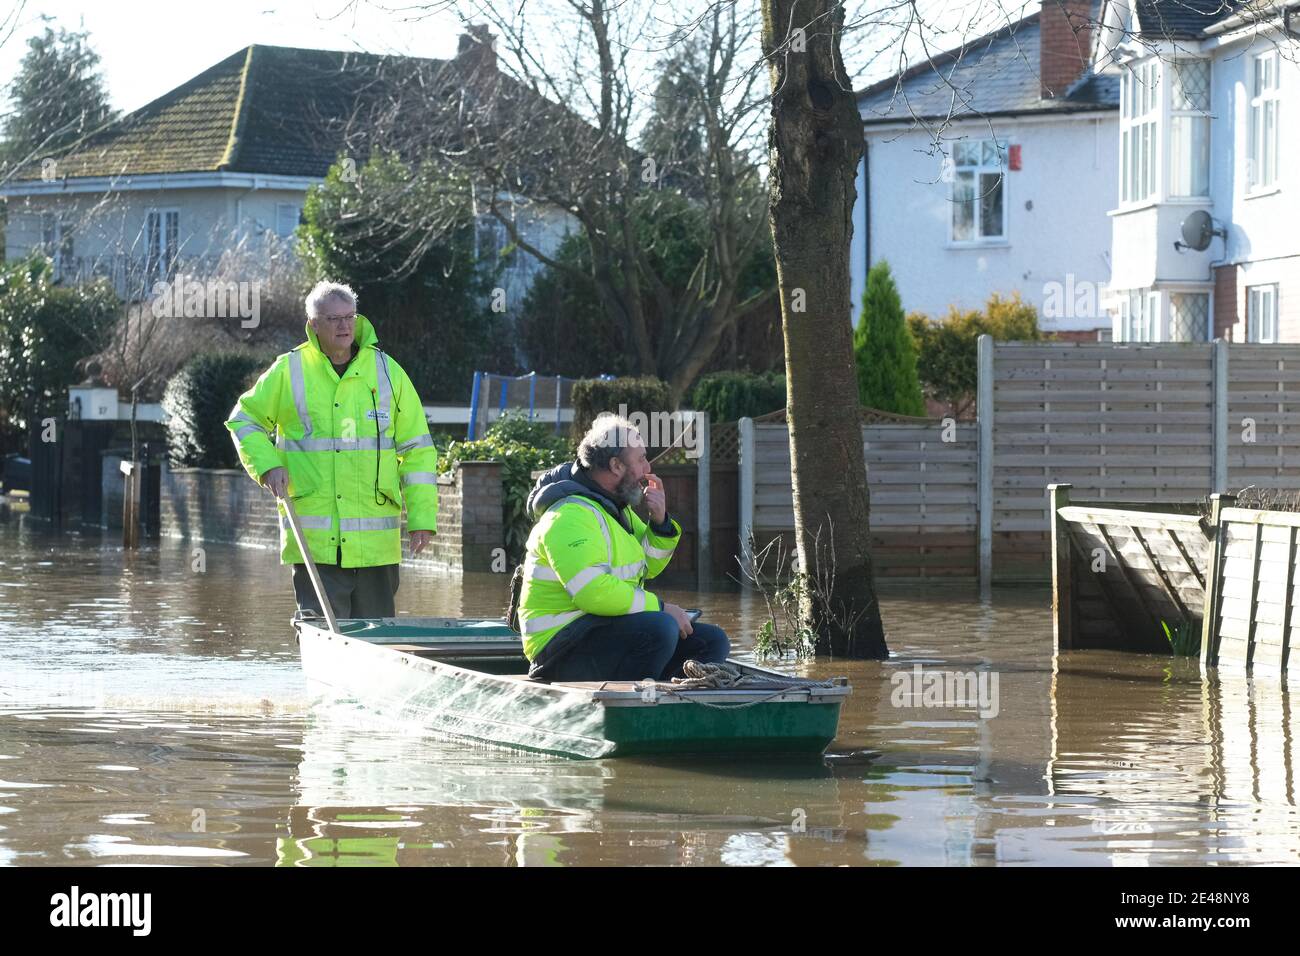 Hereford, Herefordshire UK - Friday 22nd January 2021 -  Local flood warden Colin Taylor helps an Environment Agency staff member ( in boat ) to assess the flood damage in the flooded Greyfriars area of the city caused by the River Wye flooding. River levels have started to drop but the residents here face many months of turmoil to re-build yet again after previous floods in Feb 2020 and Oct 2019. Photo Steven May / Alamy Live News Stock Photo